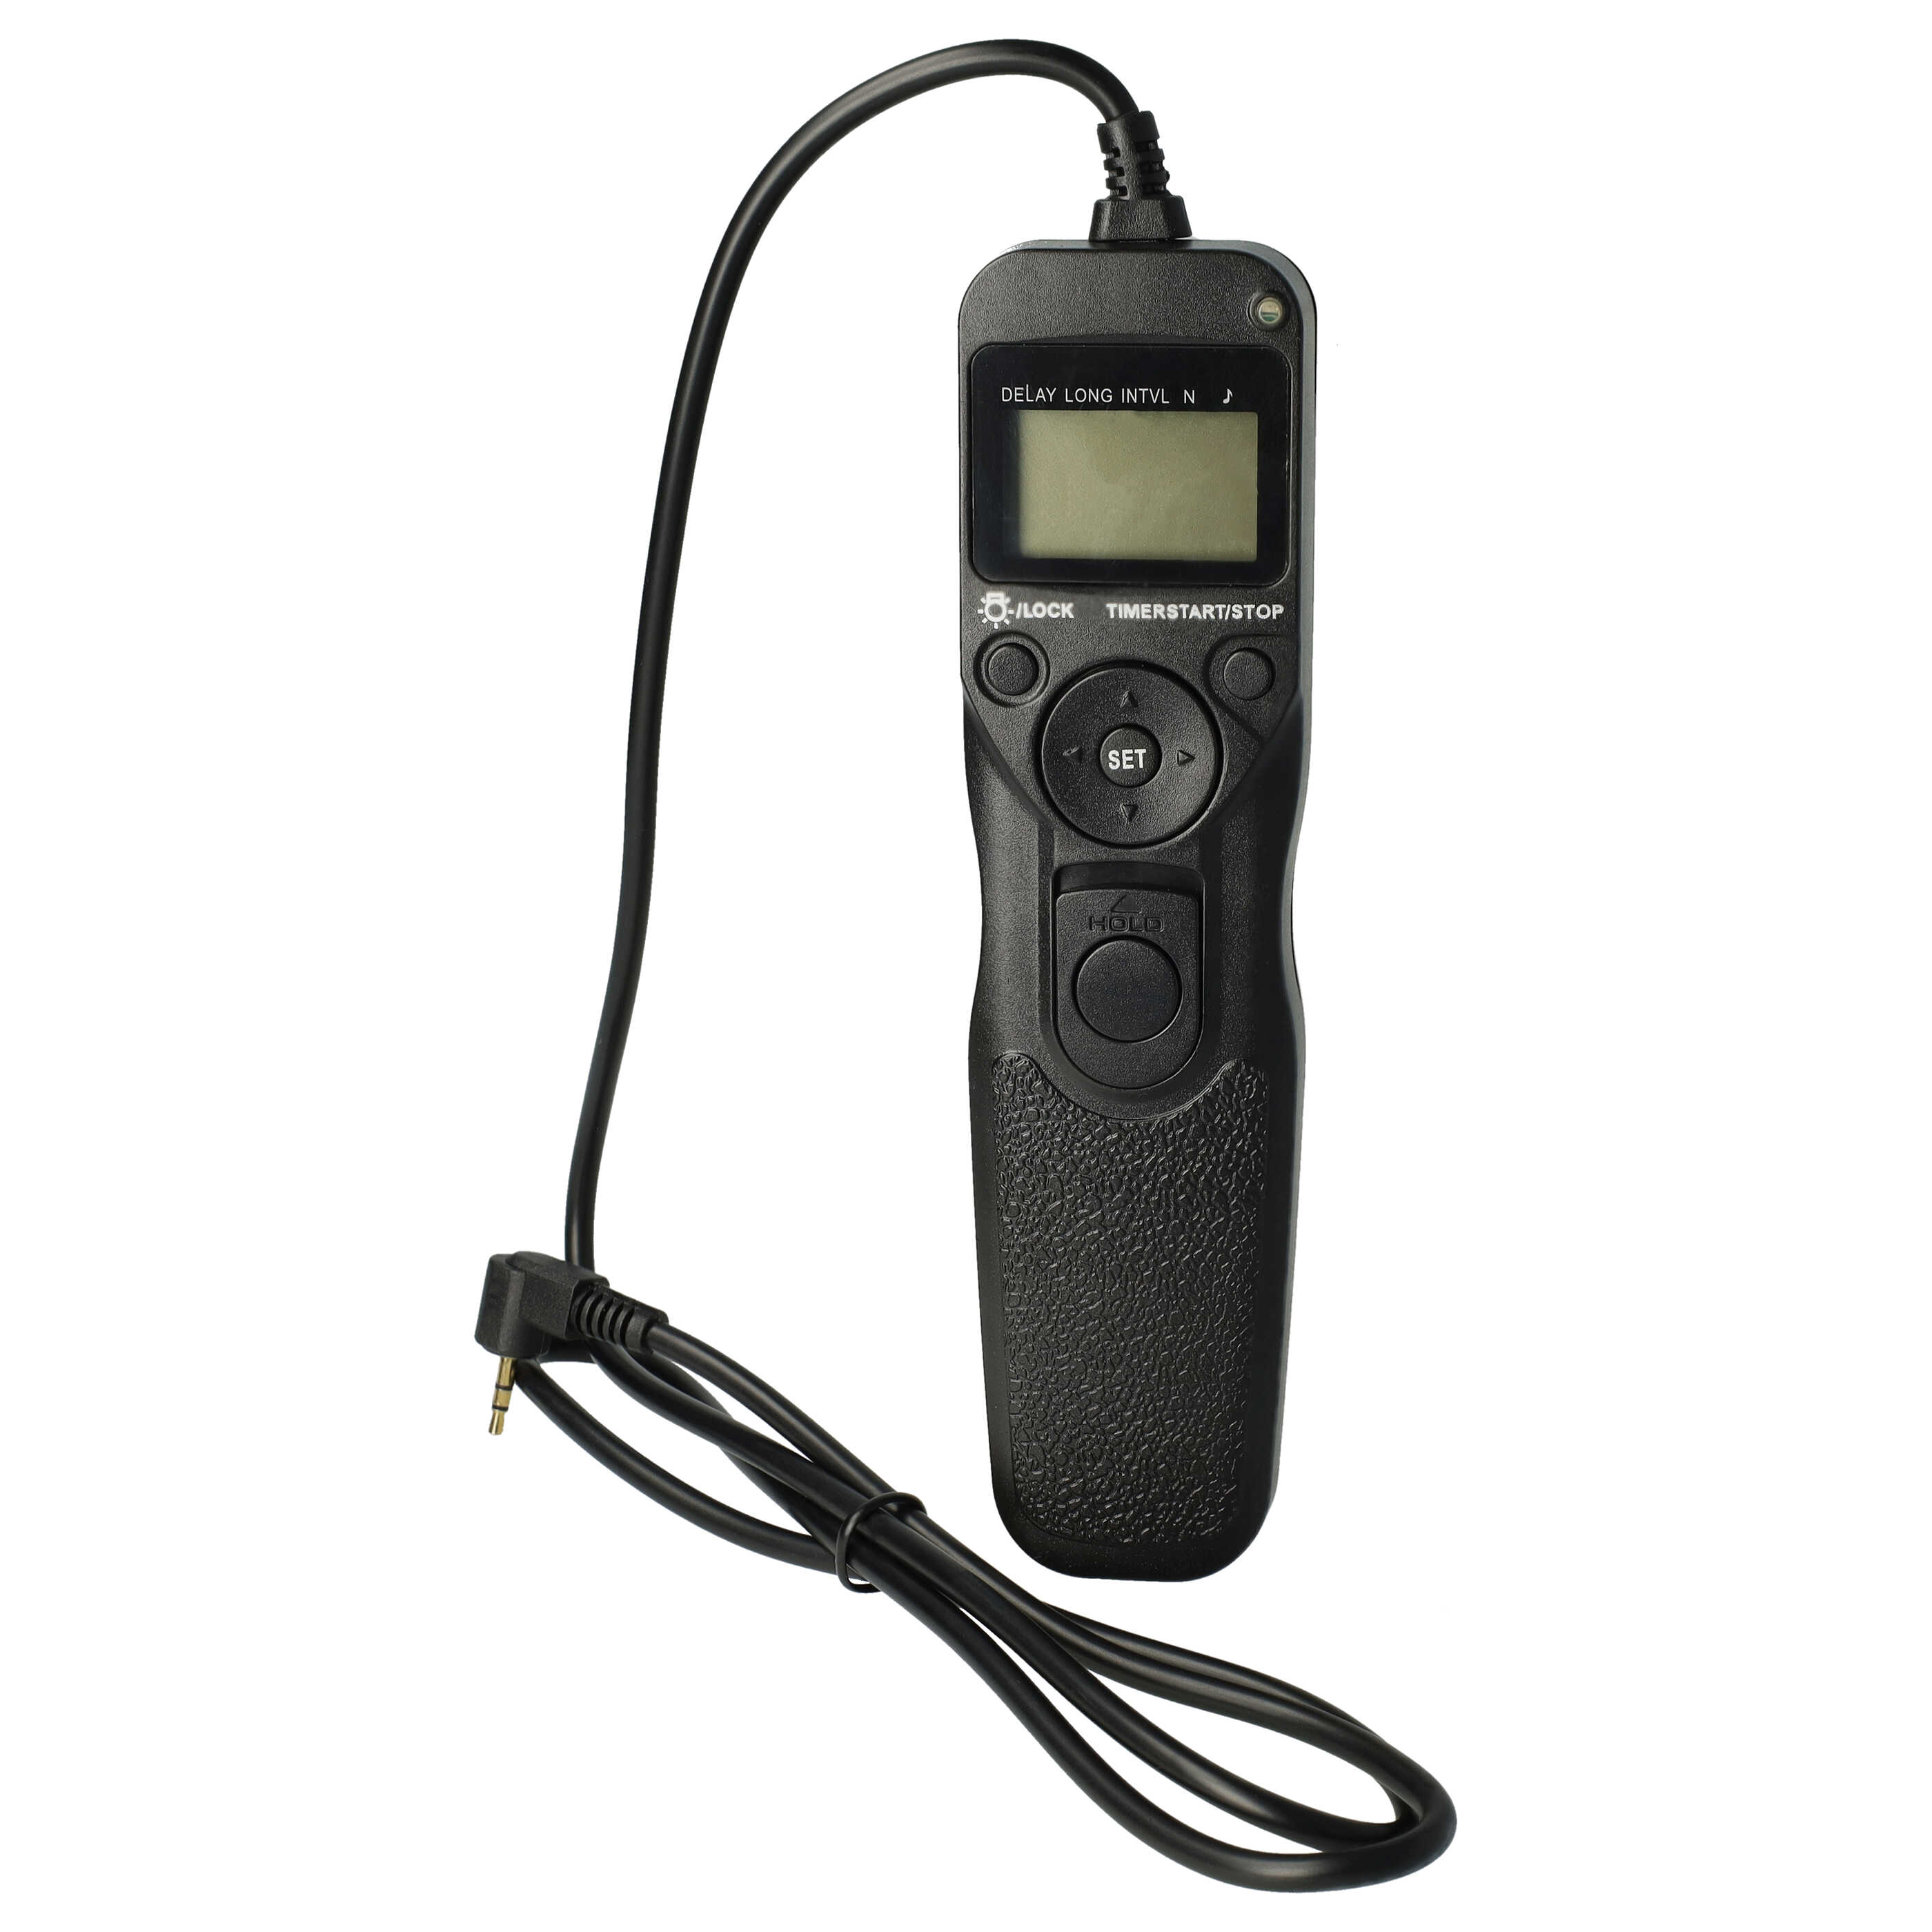 Remote Trigger as Exchange for Canon RS-60E3 for Camera etc. + Timer, 2-Step Shutter, 1 m Lead